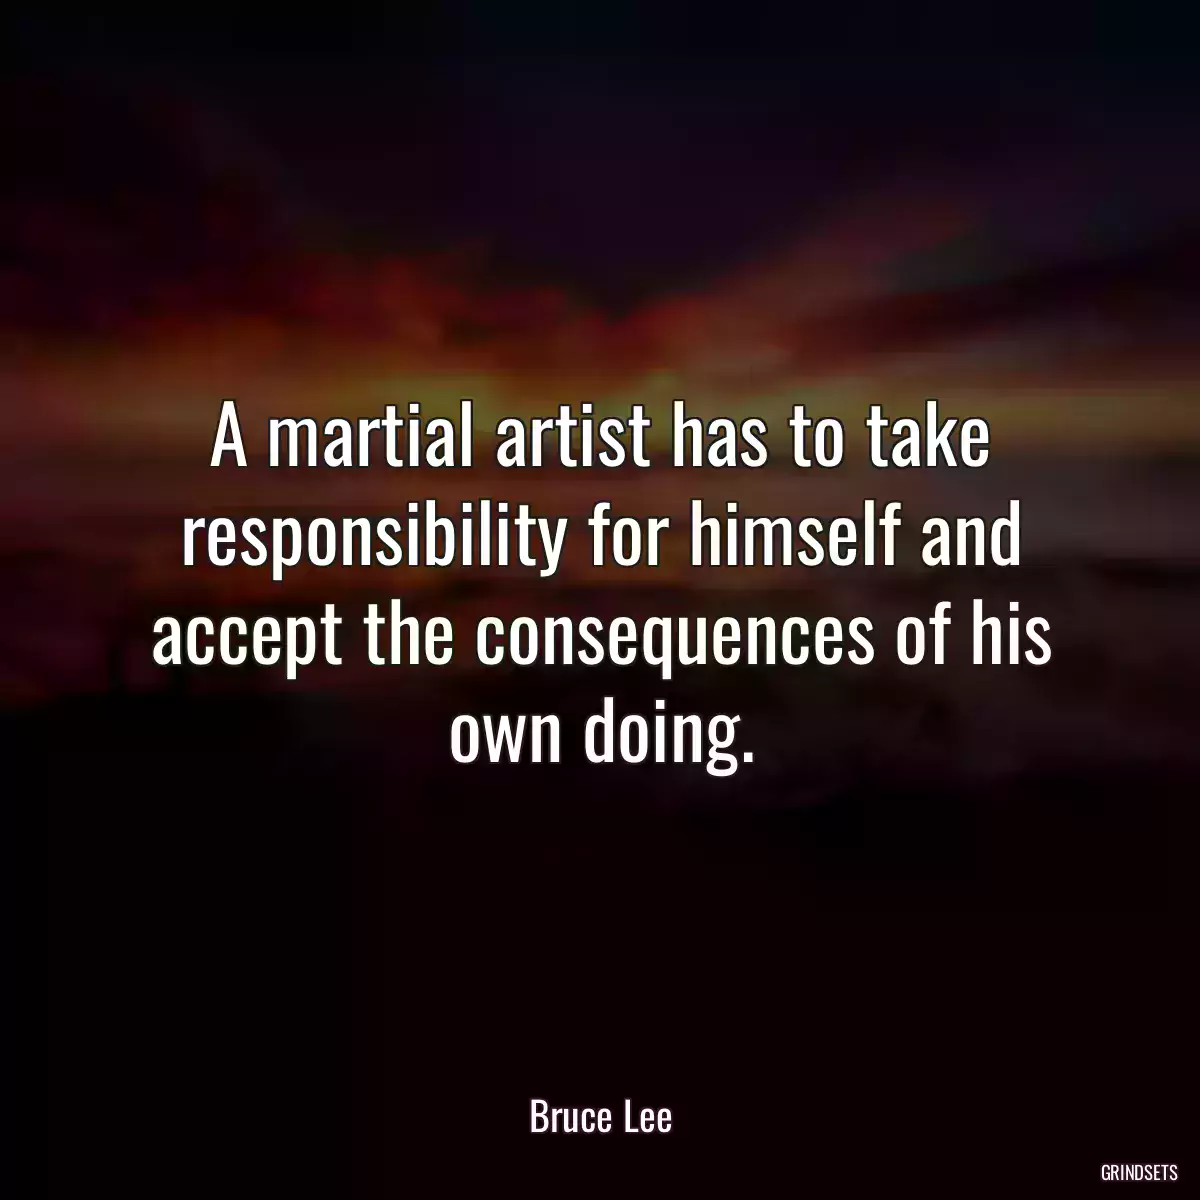 A martial artist has to take responsibility for himself and accept the consequences of his own doing.